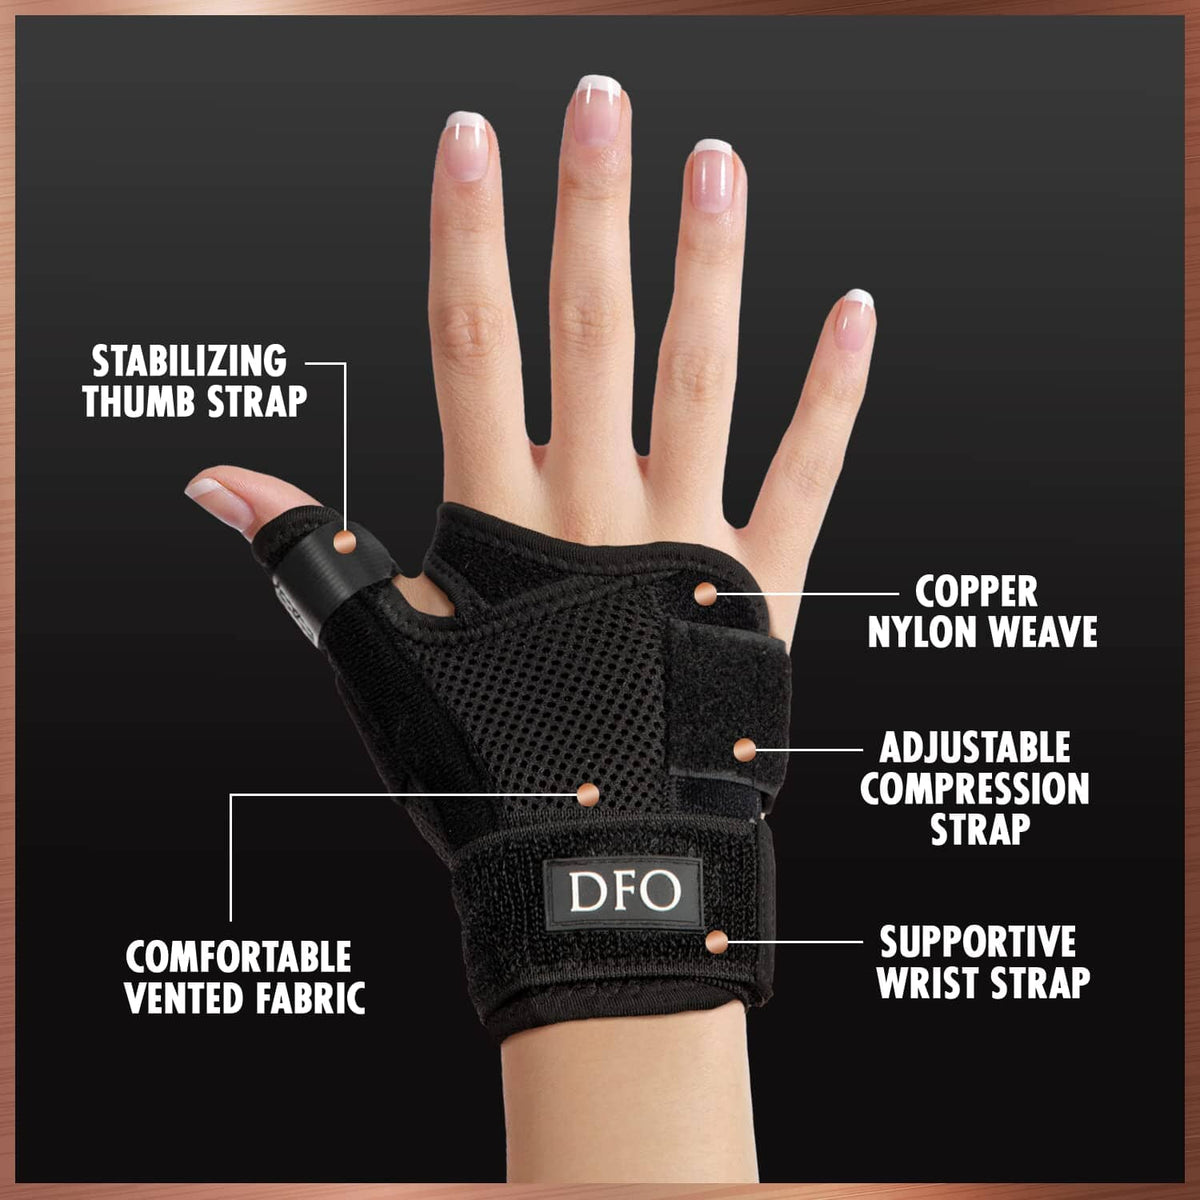 Dr. Frederick&#39;s Original Reversible Copper Infused Wrist Thumb Brace - 1 Brace - Spica Splint for De Quervain’s Tendonitis, Arthritis, CMC, Pain Relief - Left or Right Hand - Fits Men and Women Thumb and Wrist Pain Dr. Frederick&#39;s Original 